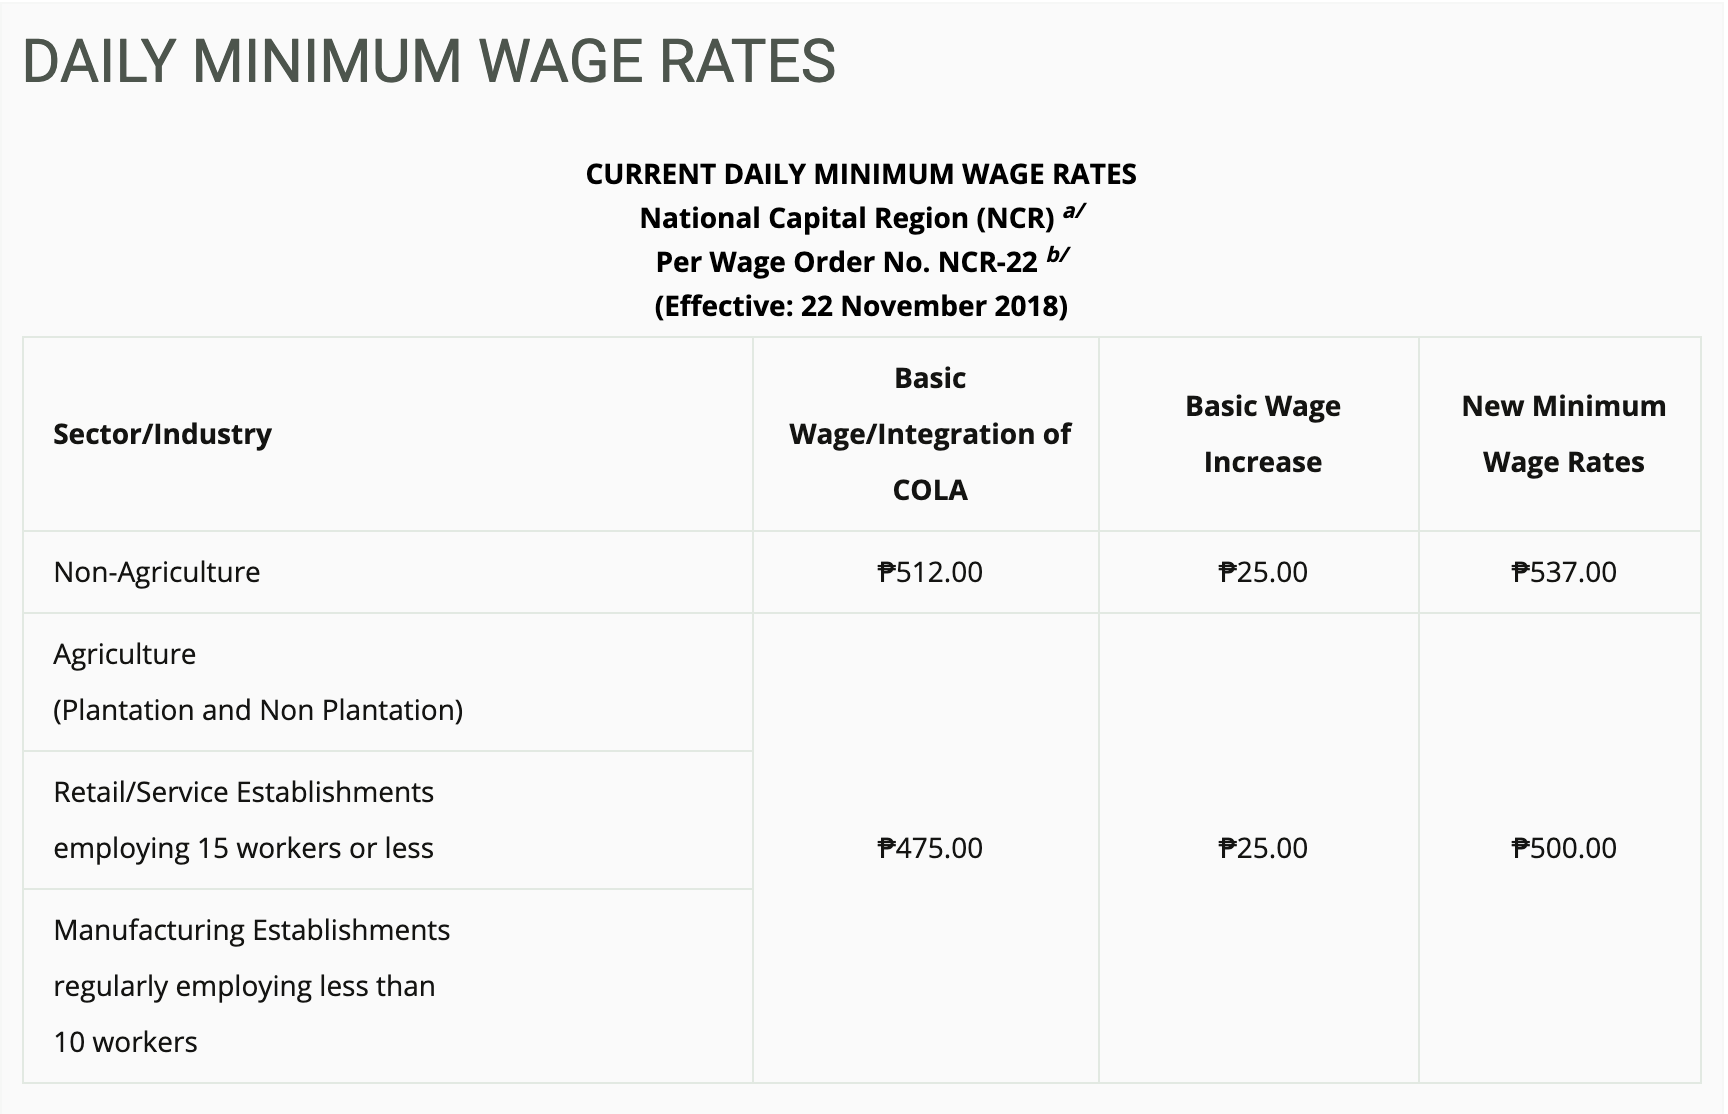 How Much Is the Minimum Wage in Metro Manila (NCR)? PayrollHero Support